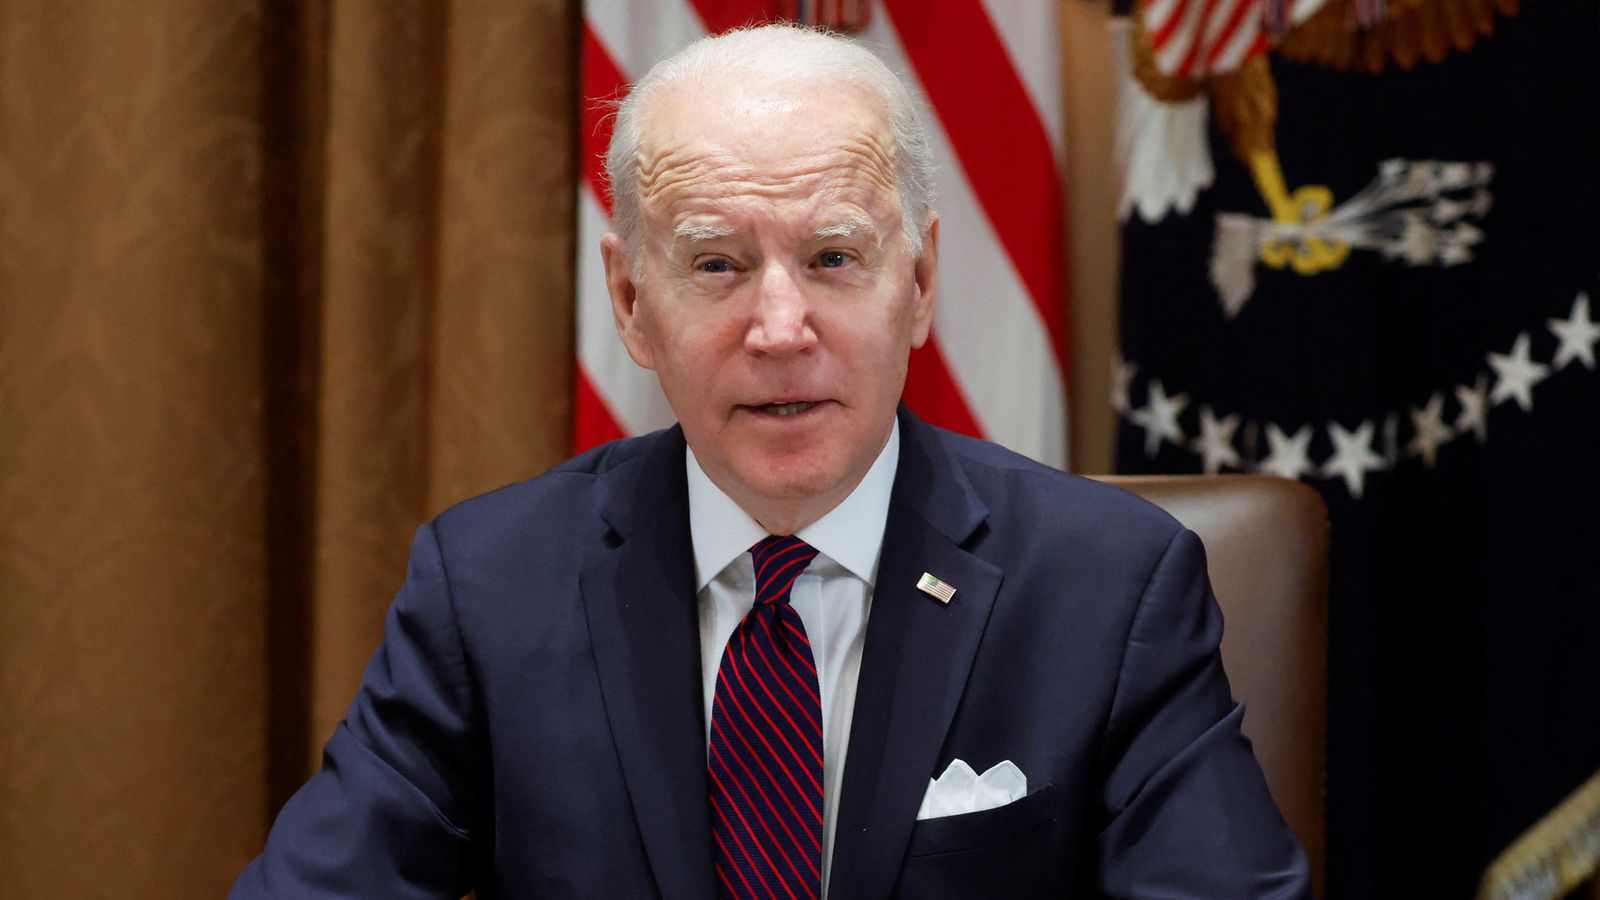 Ukraine: ‘Russia will pay heavy price’ if it invades neighbouring country, President Biden warns